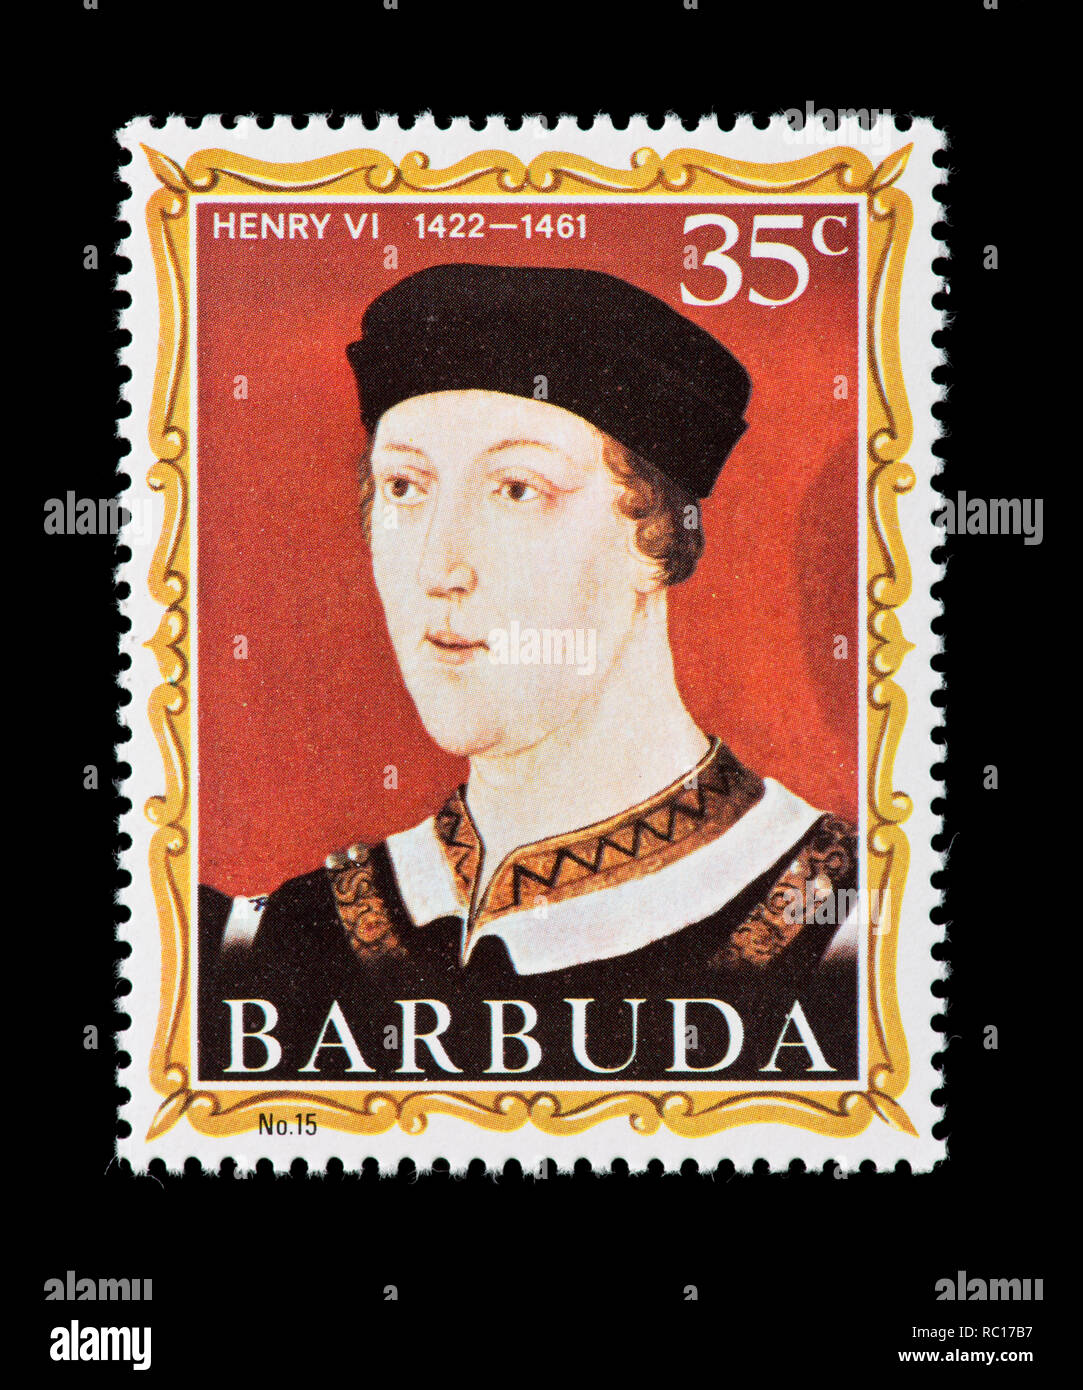 Postage stamp from Barbuda depicting Henry VI, former king of England Stock Photo